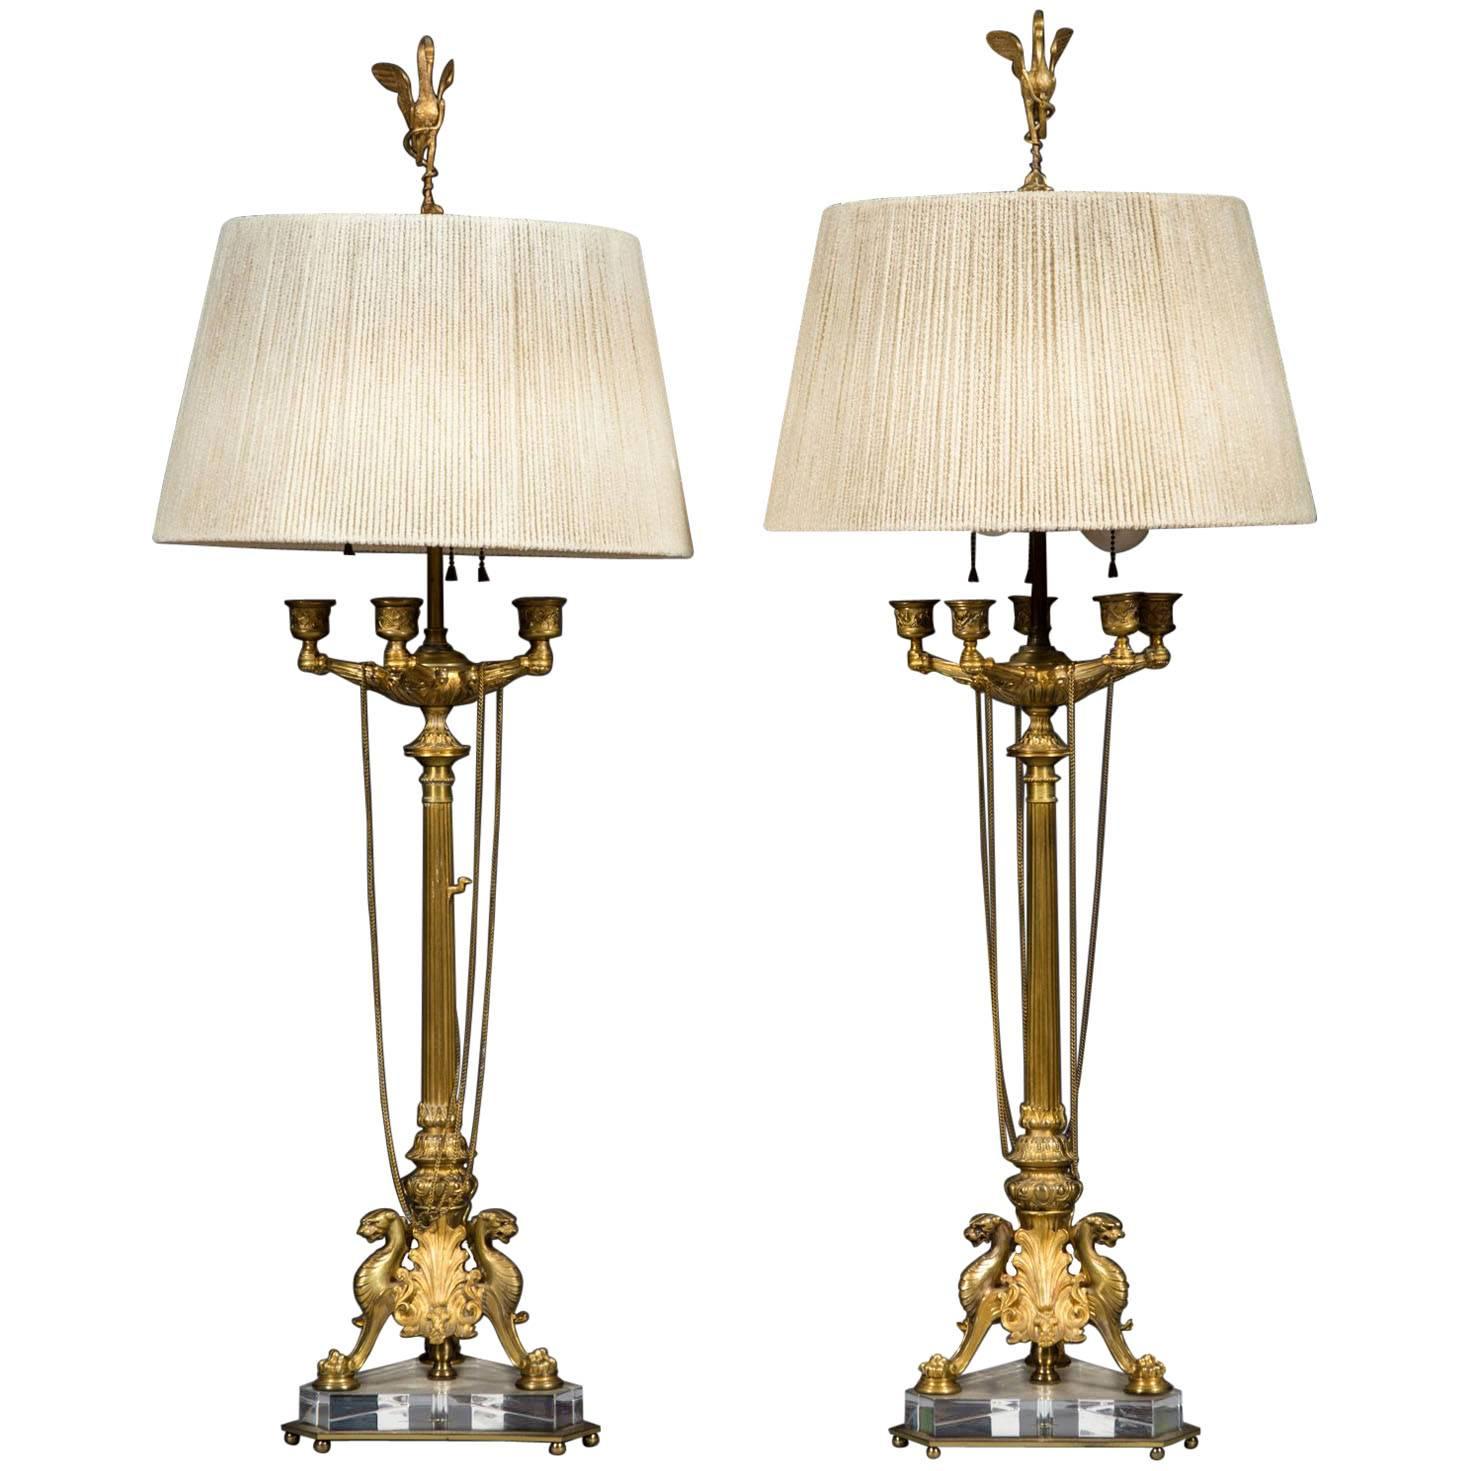 Very Fine Pair of 19th Century French Gilt Bronze Five-Branch Candelabras